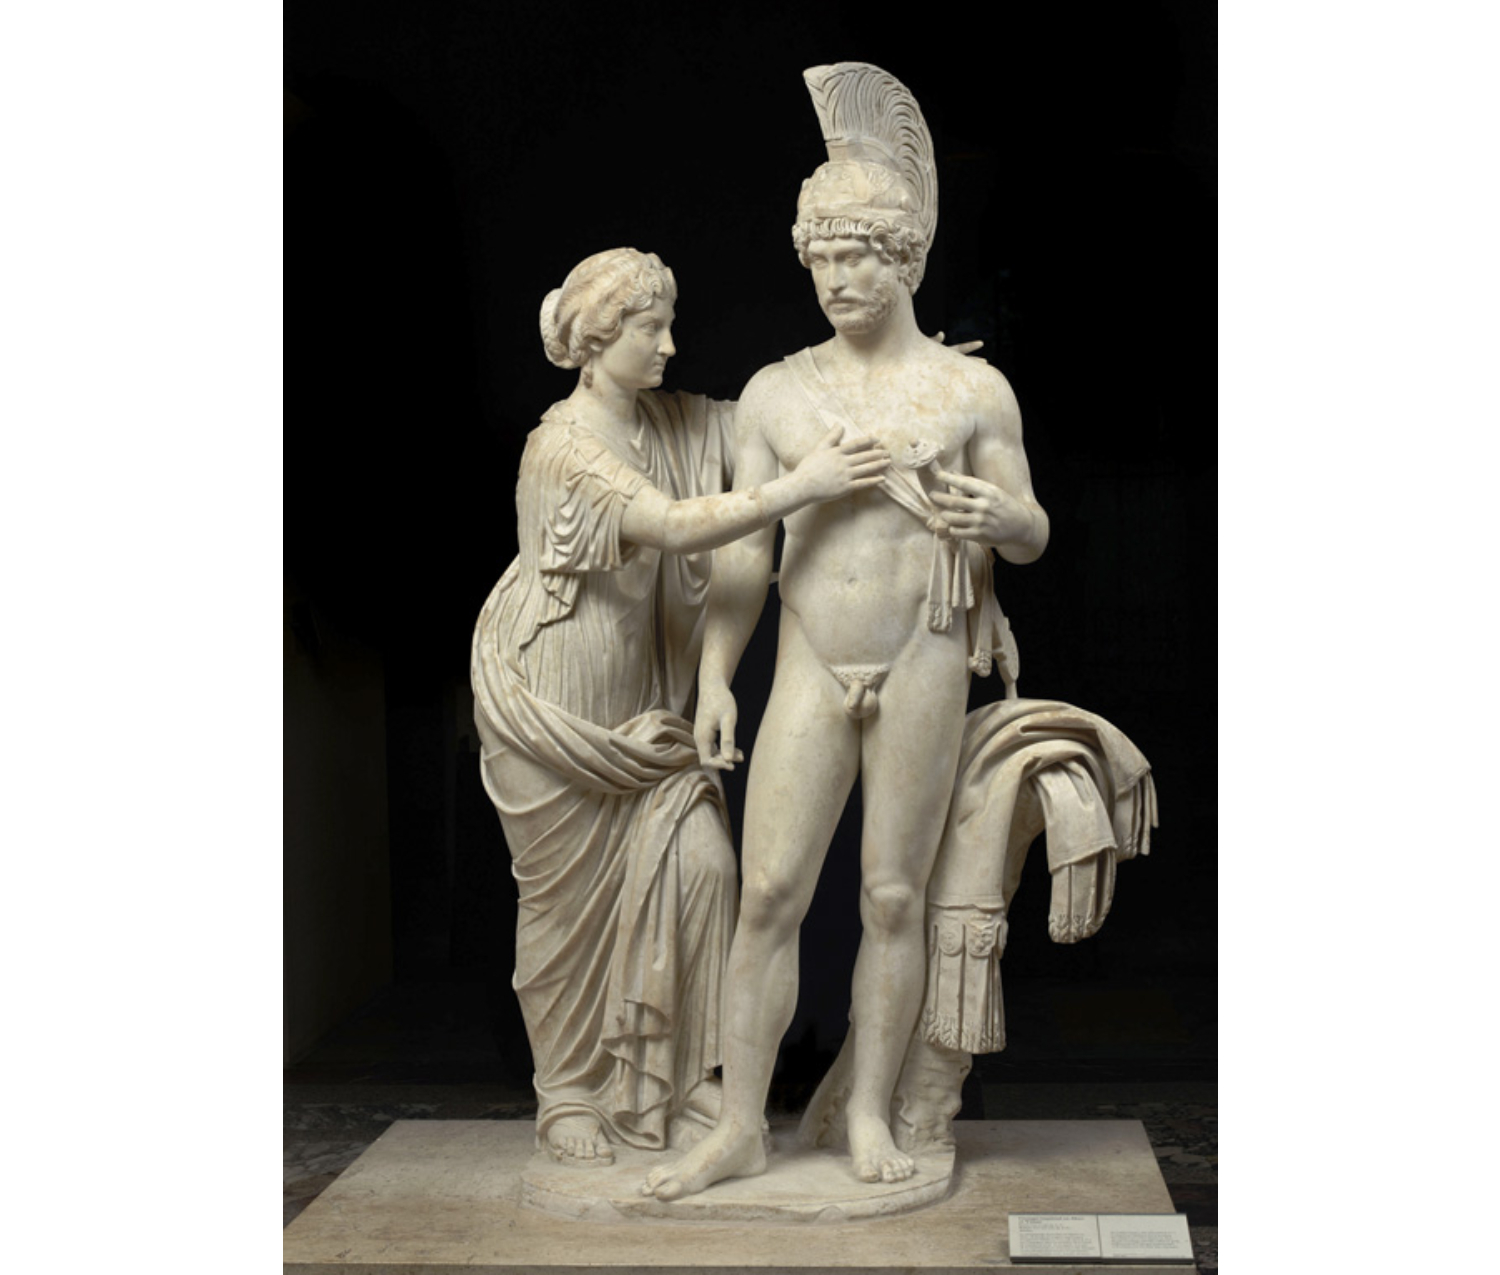 Statue of a man wearing a helmet and a woman, her arms reaching around the man, dressed in draped robes.